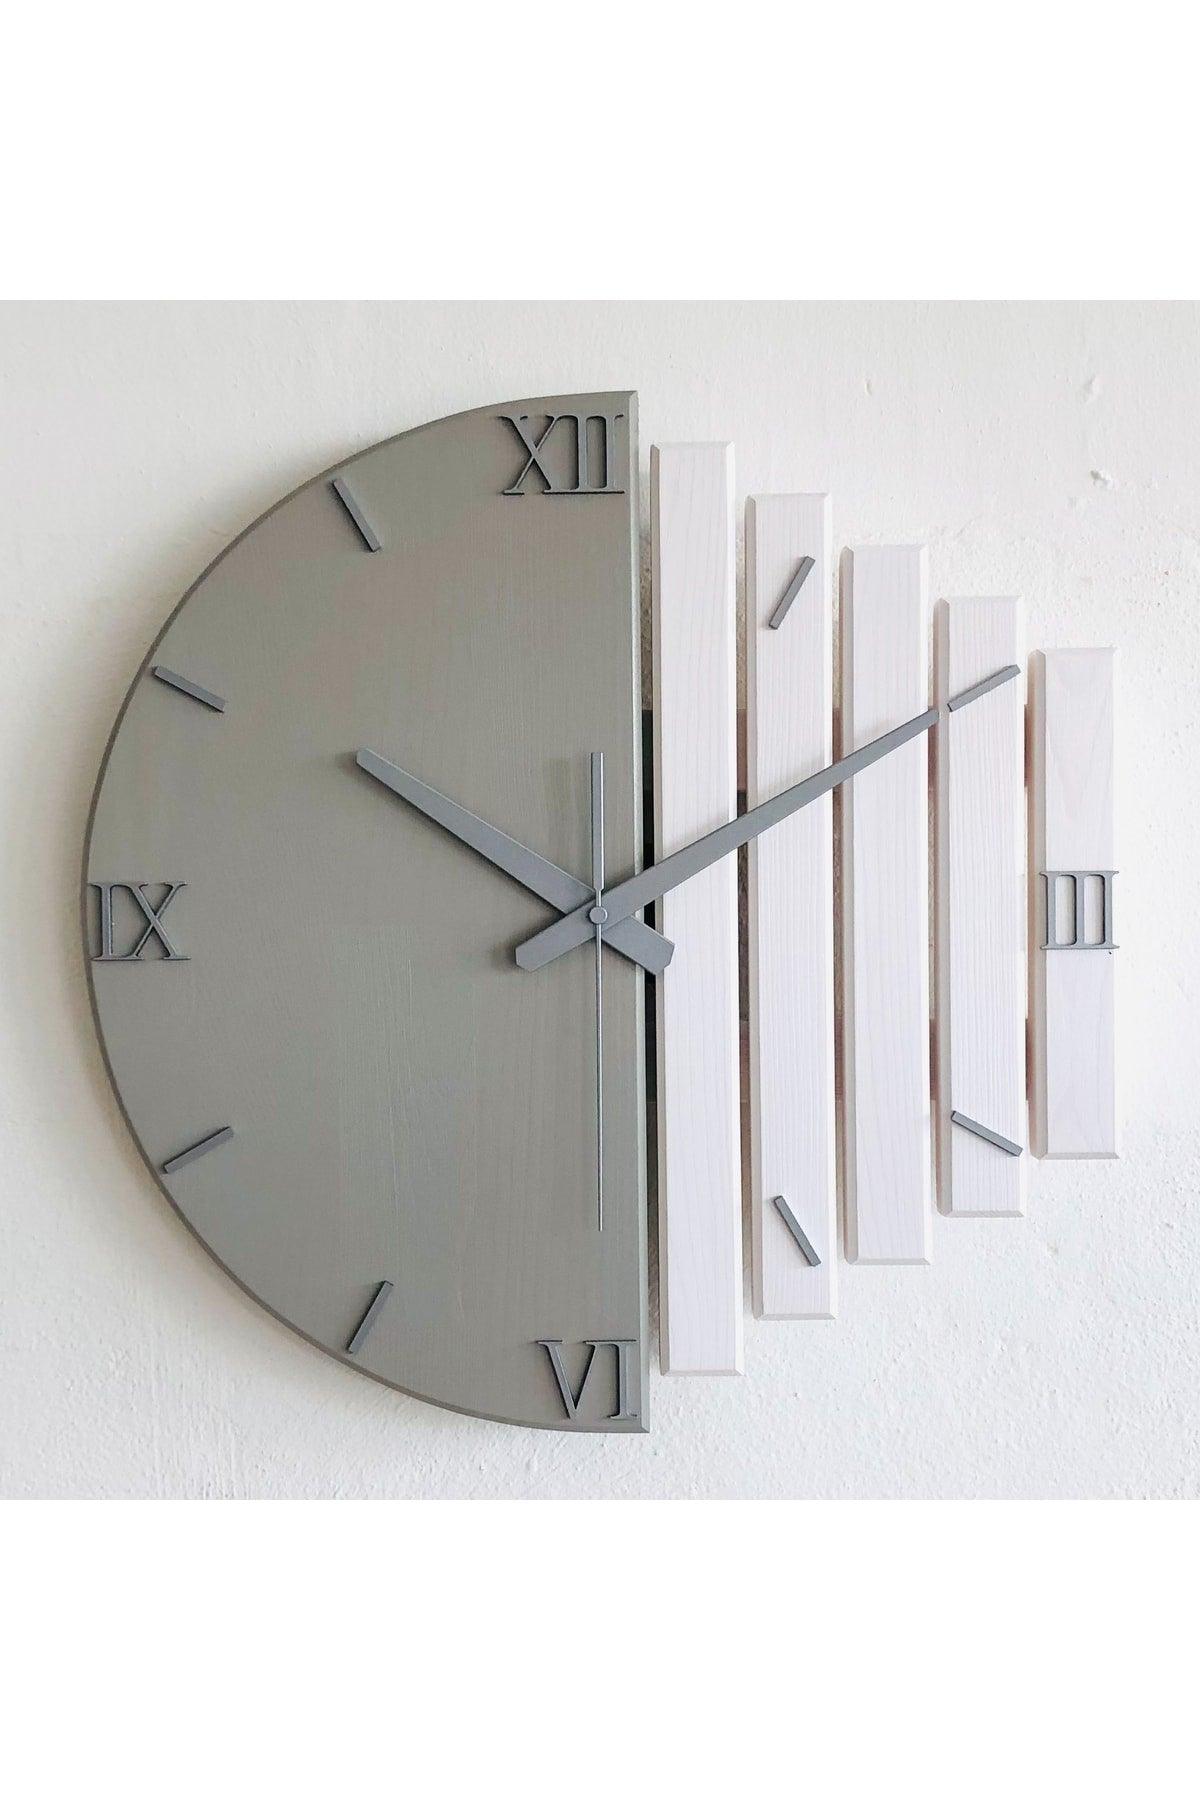 Handmade Solid Wood Wall Clock 40x40cm Mink Gray & White - Silver Numeral - Swordslife